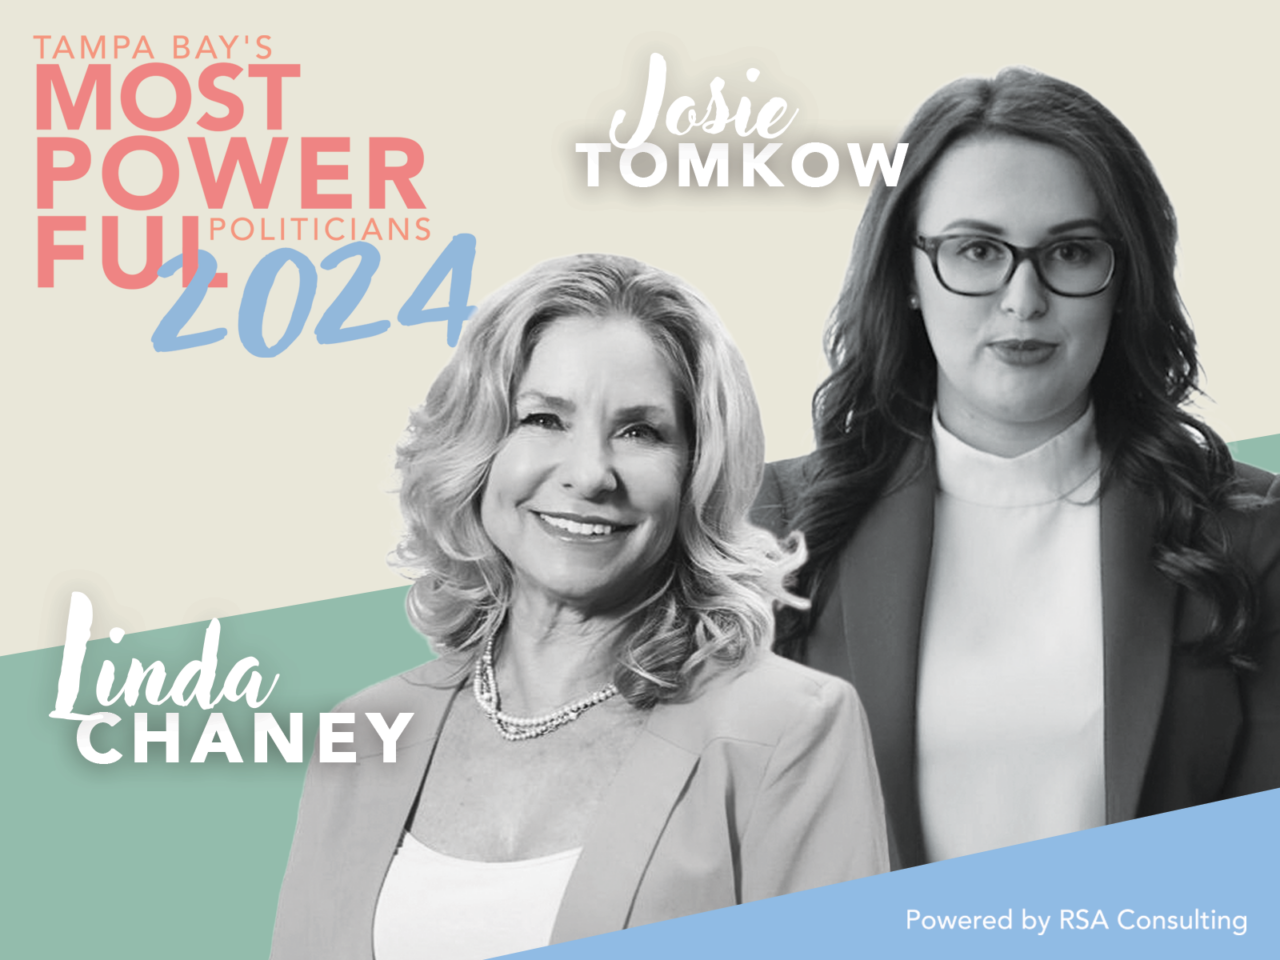 tampa-bays-most-powerful-politicians-2024-chaney-and-tomkow-1280x960.png